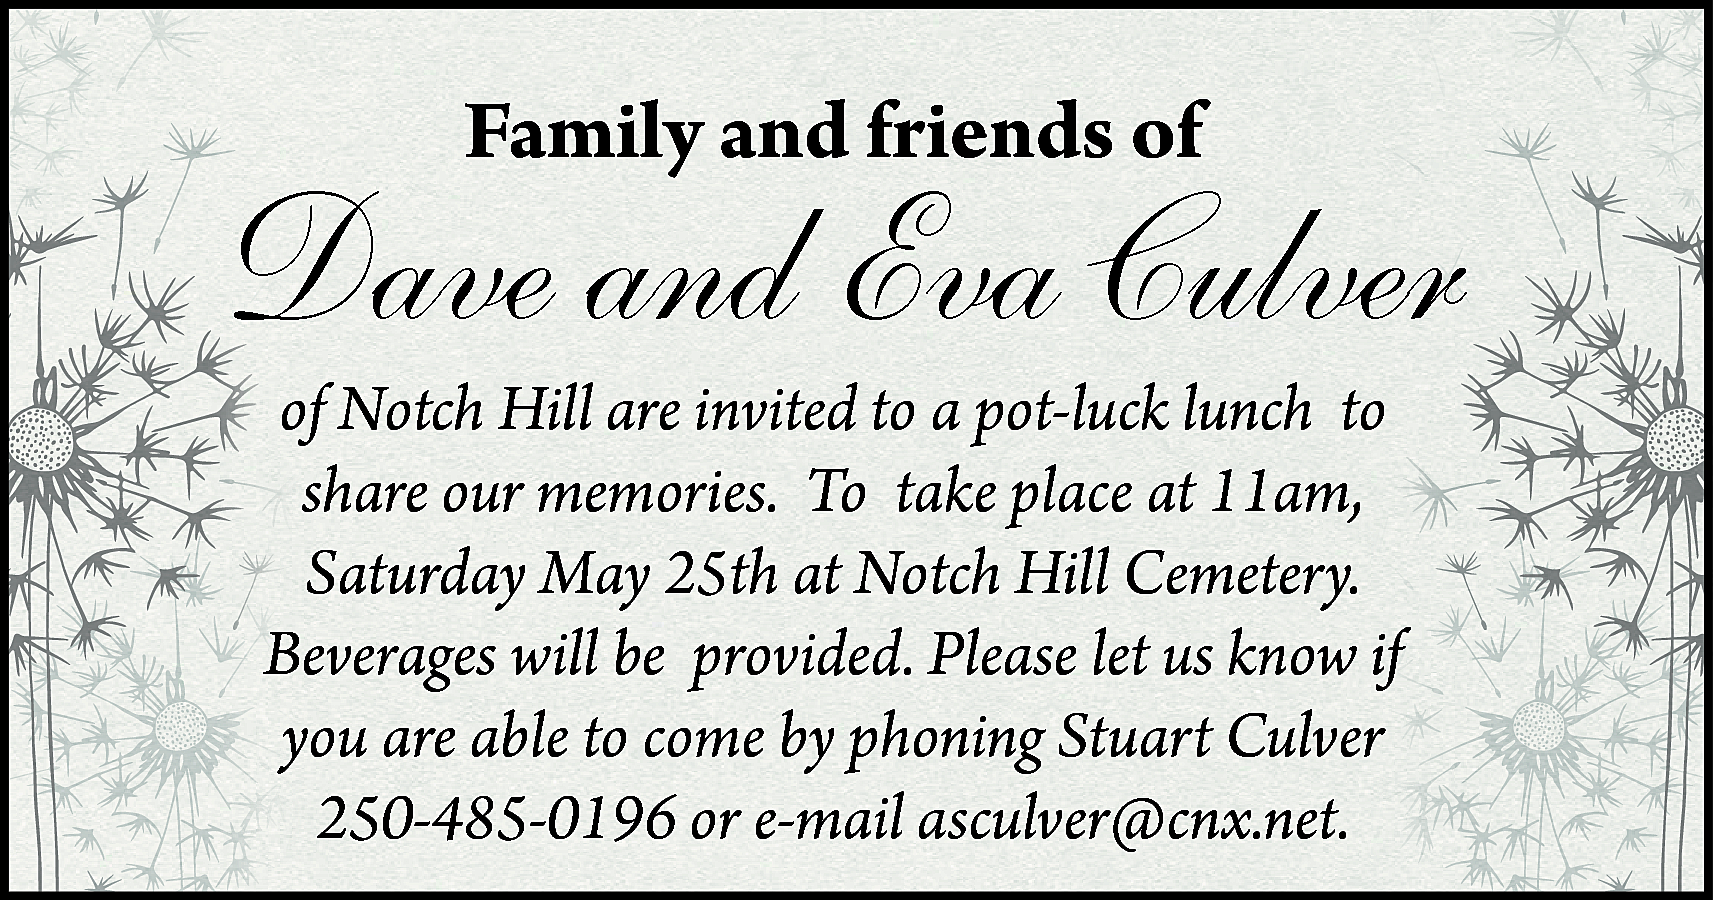 Family and friends of <br>  Family and friends of    Dave and Eva Culver  of Notch Hill are invited to a pot-luck lunch to  share our memories. To take place at 11am,  Saturday May 25th at Notch Hill Cemetery.  Beverages will be provided. Please let us know if  you are able to come by phoning Stuart Culver  250-485-0196 or e-mail asculver@cnx.net.    